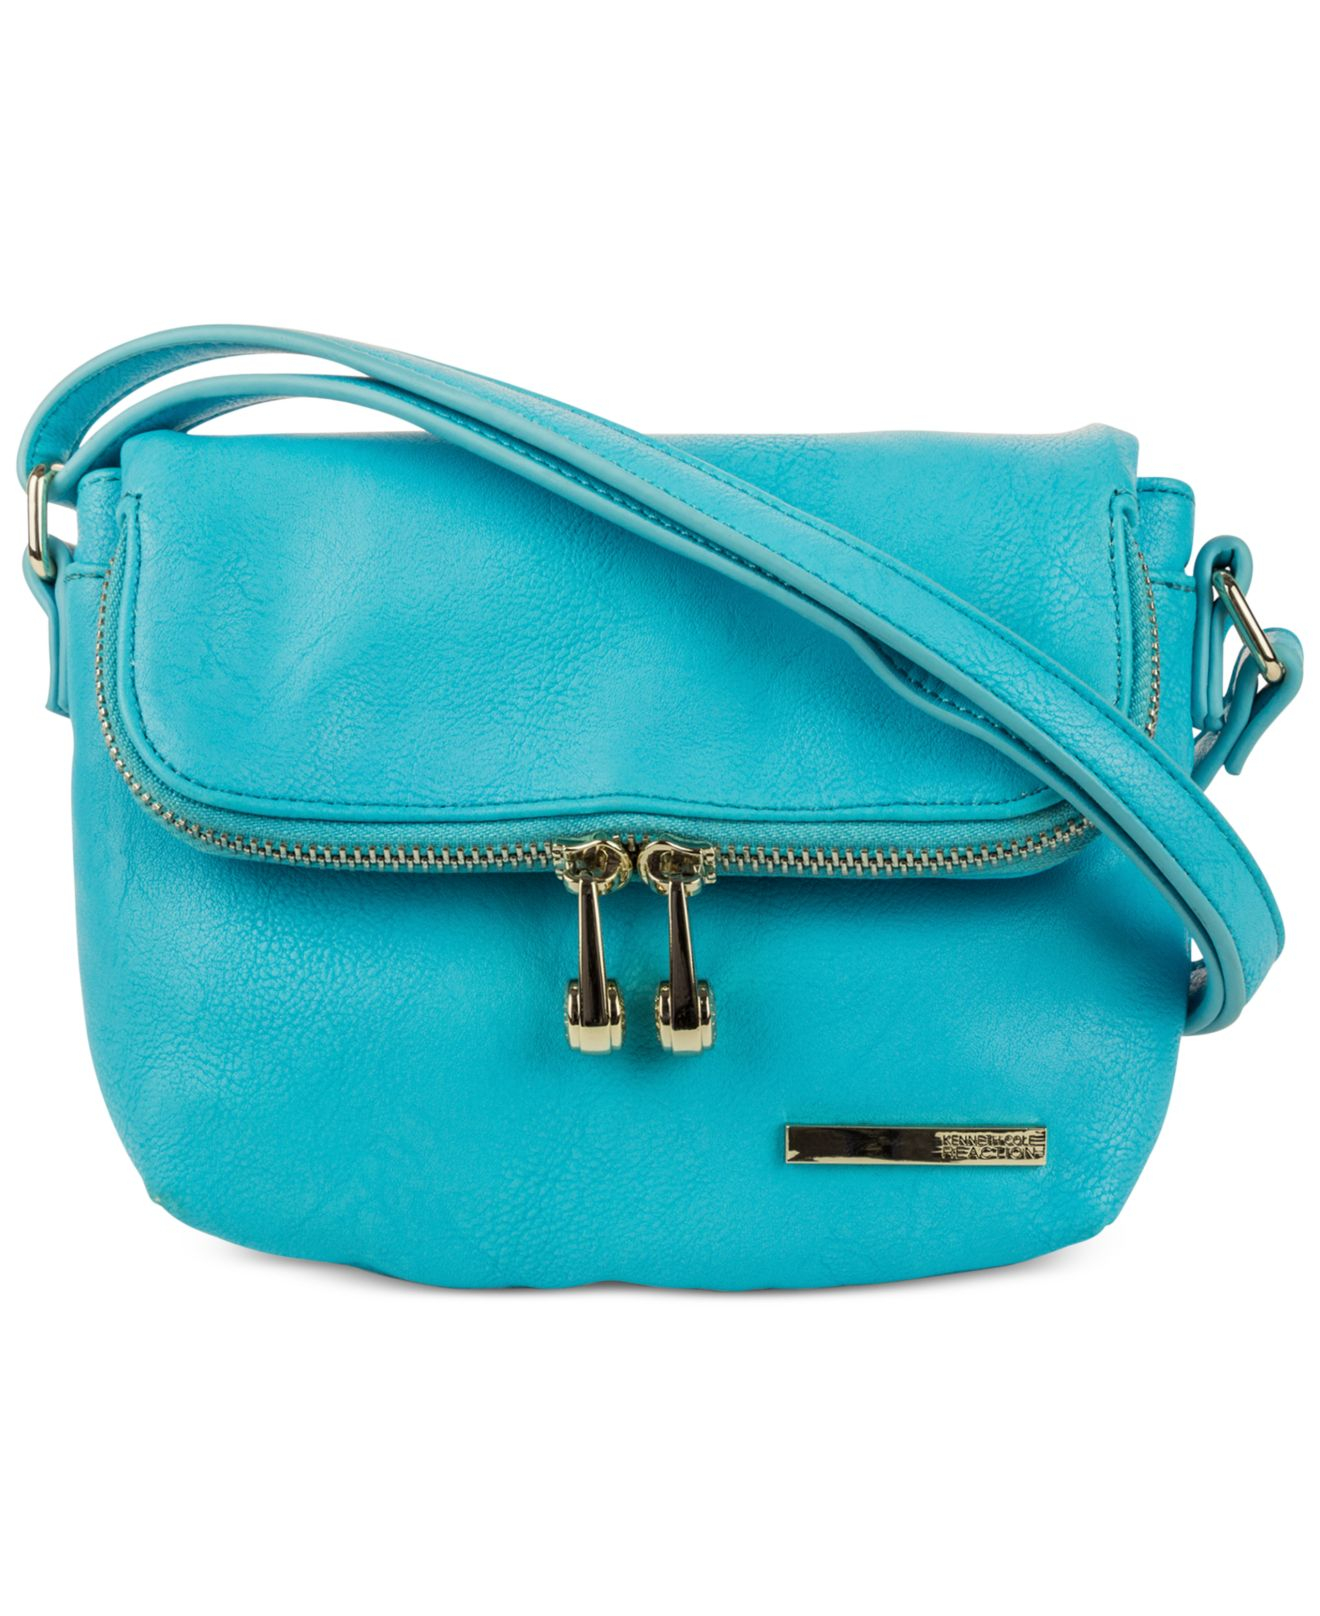 Lyst - Kenneth Cole Reaction Wooster Street Foldover Flap Mini Bag in Blue